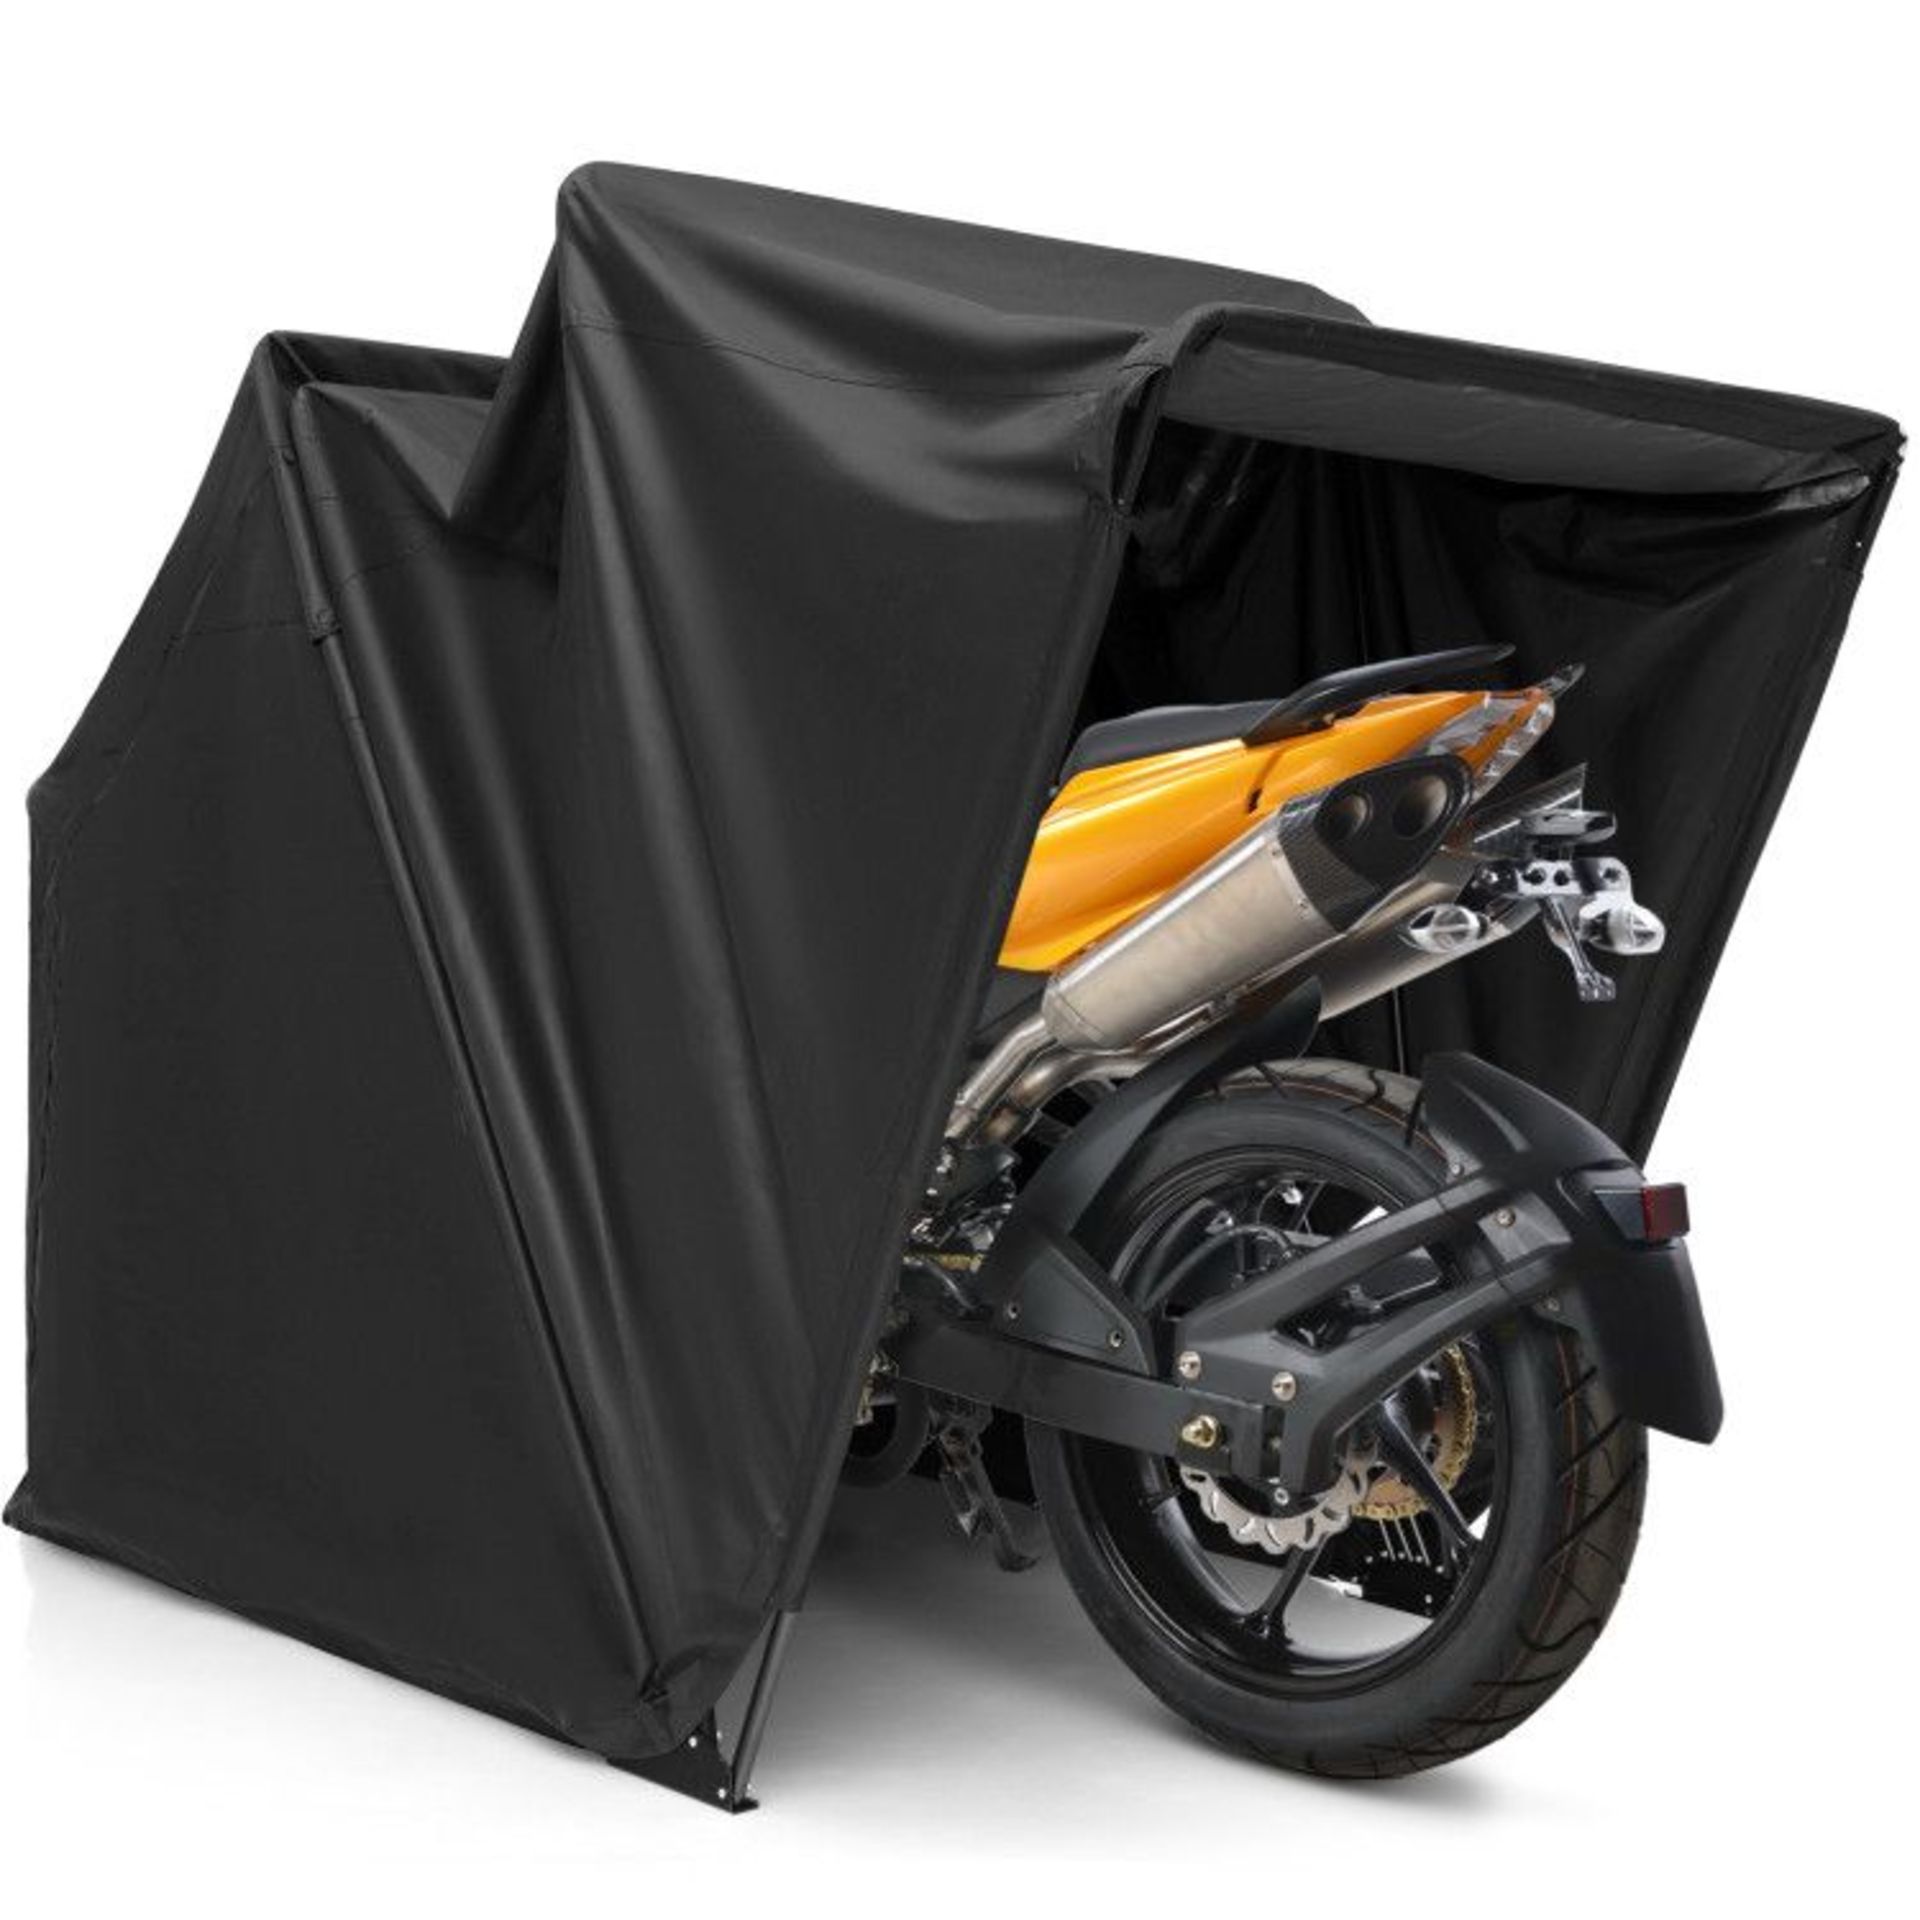 Outdoor Motorcycle Shelter Waterproof Motorbike Storage Tent with Cover. - ER53.